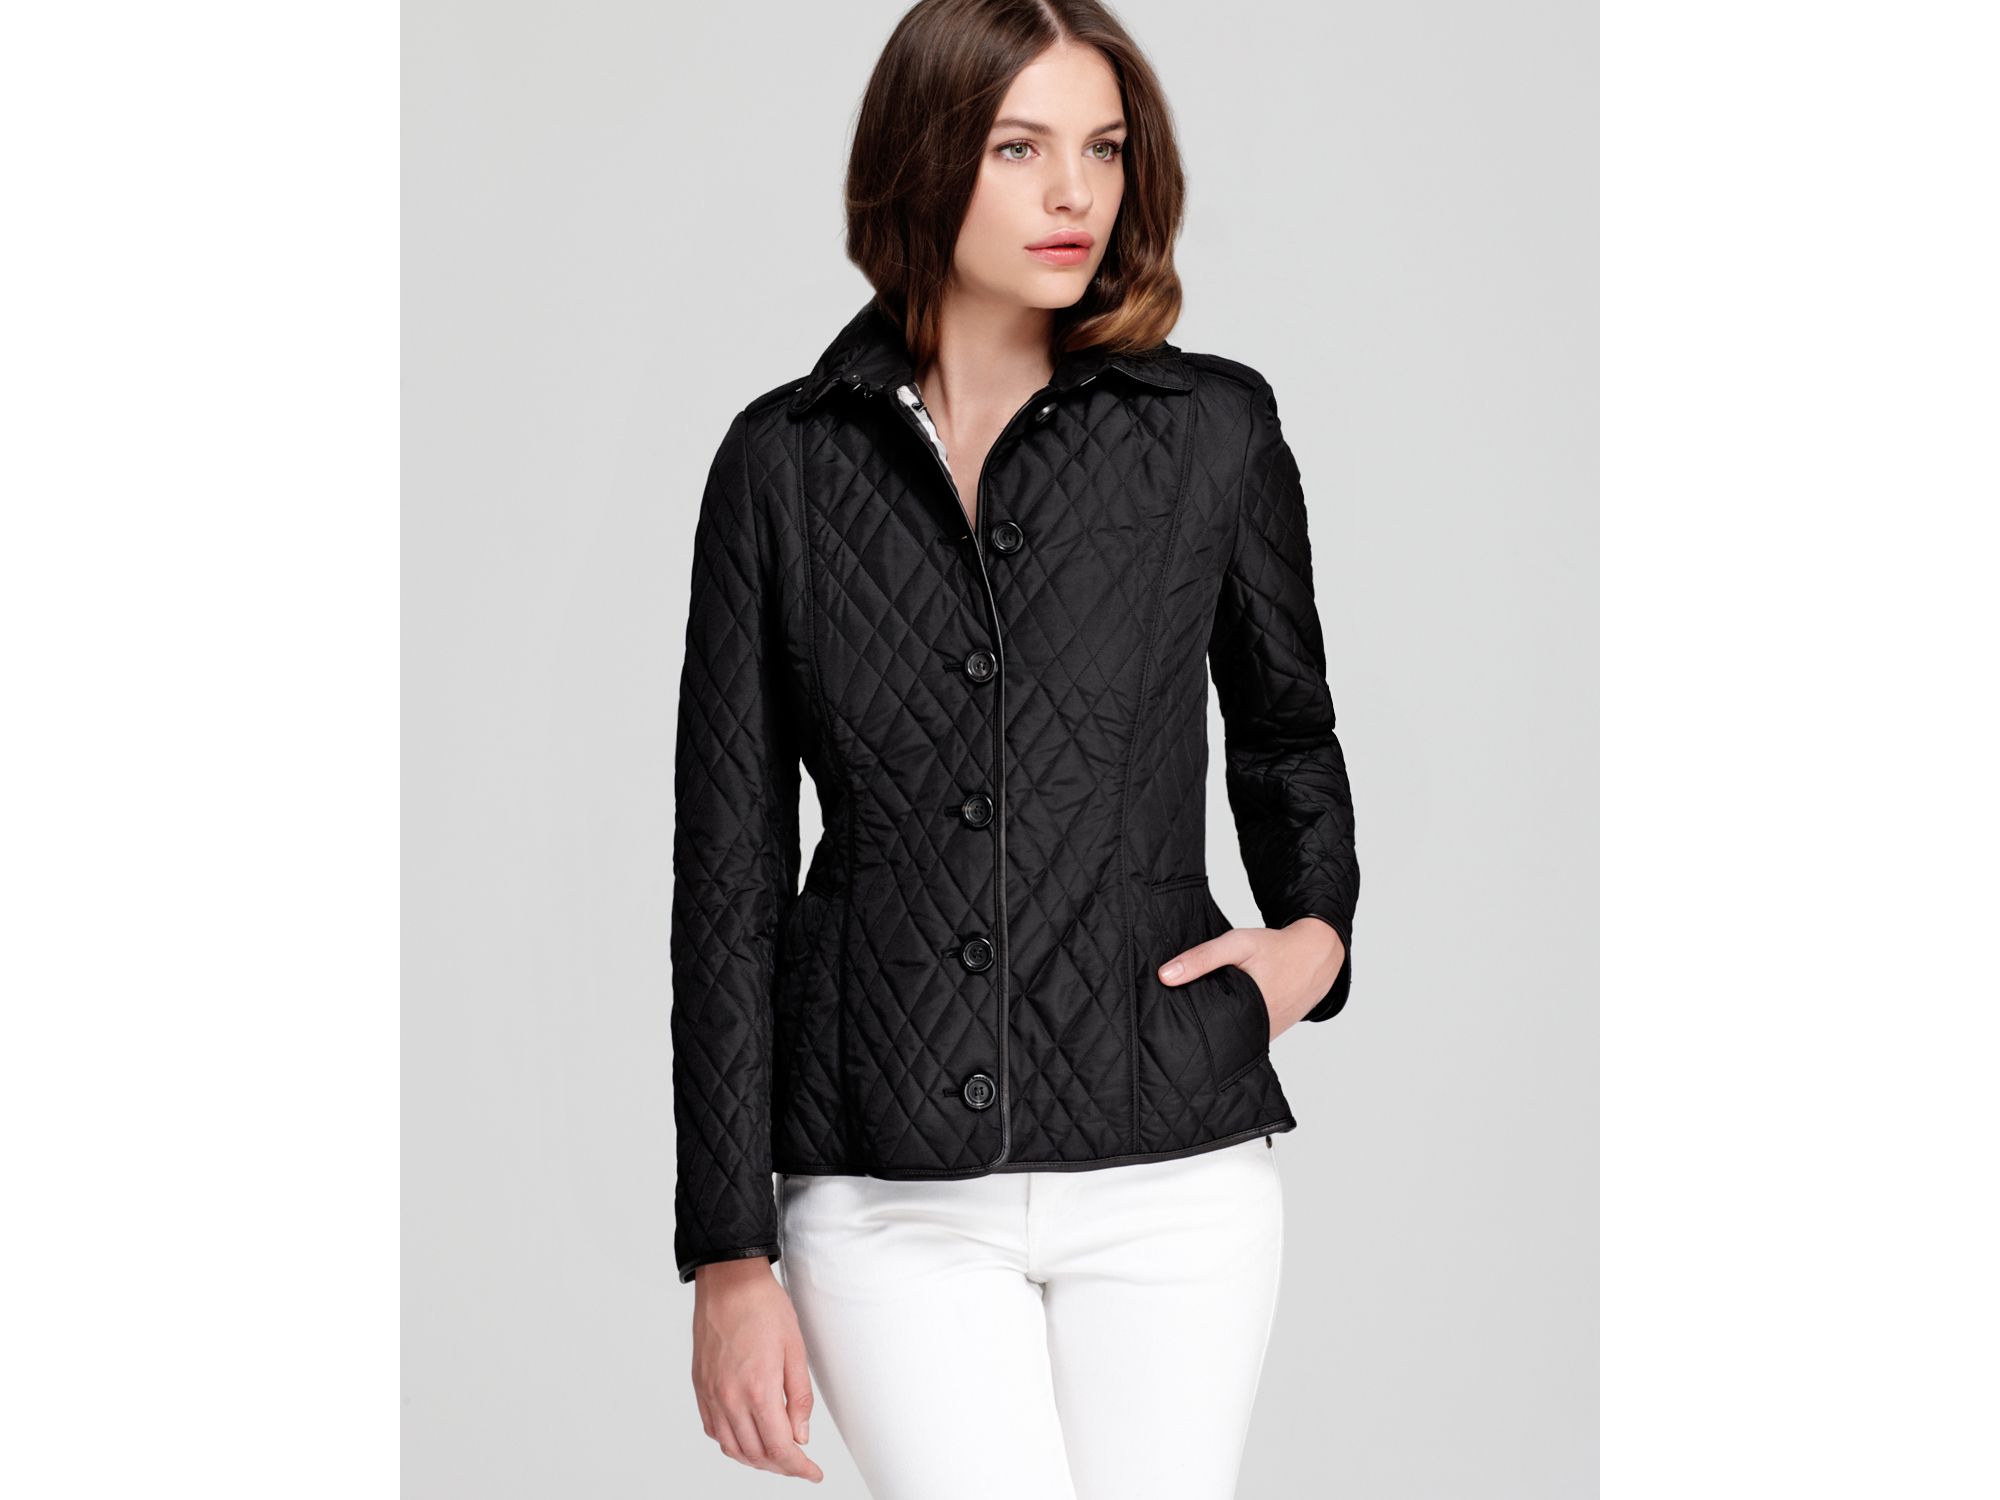 Lyst - Burberry London Jacket Enderwoodlt Quilted in Black